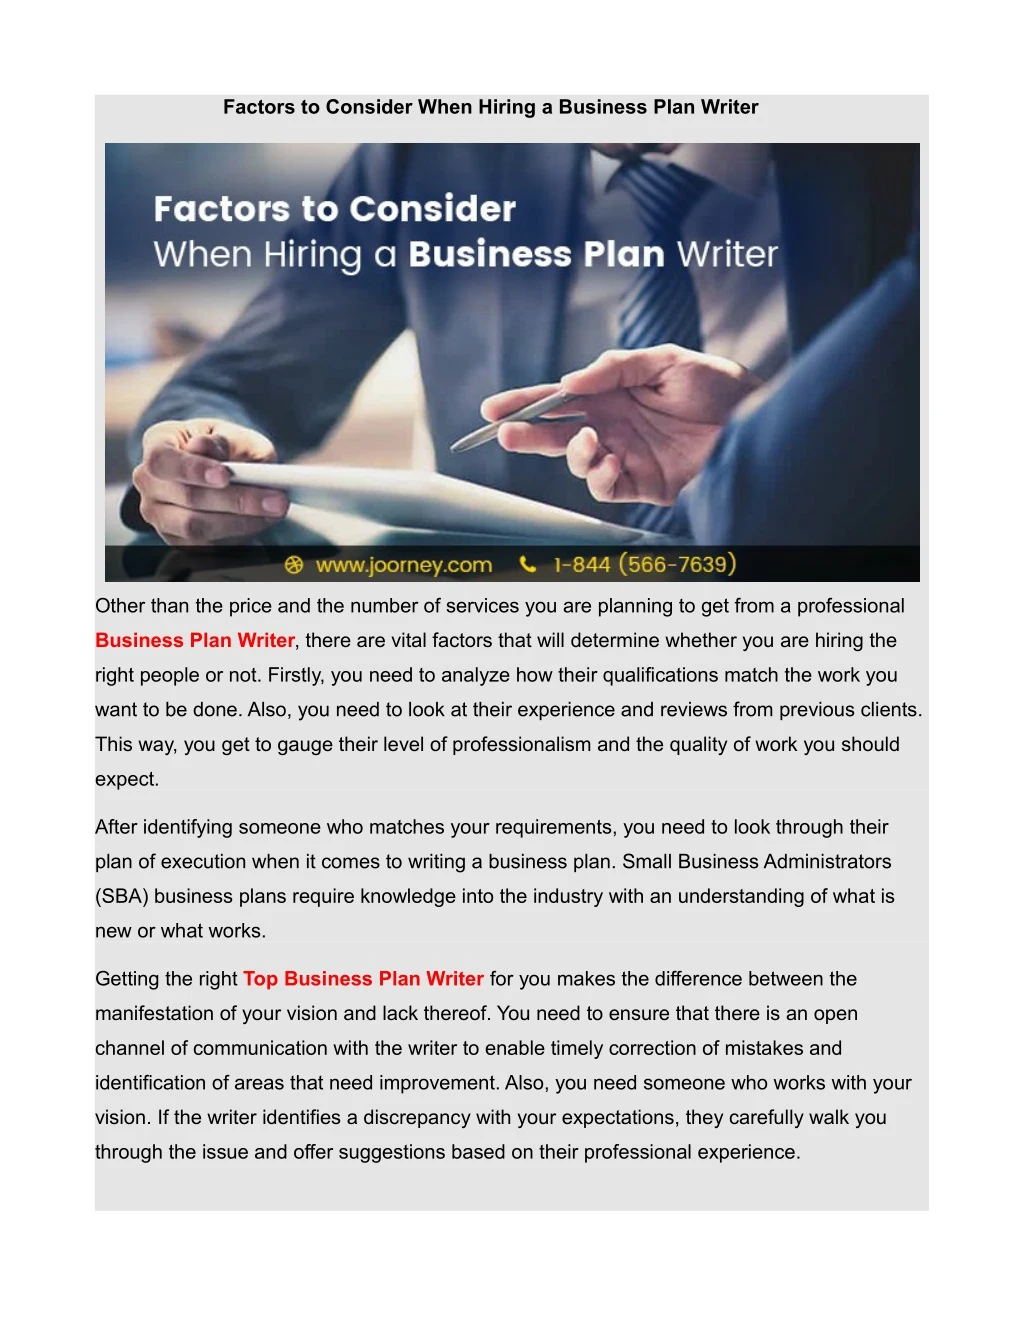 factors to consider when hiring a business plan